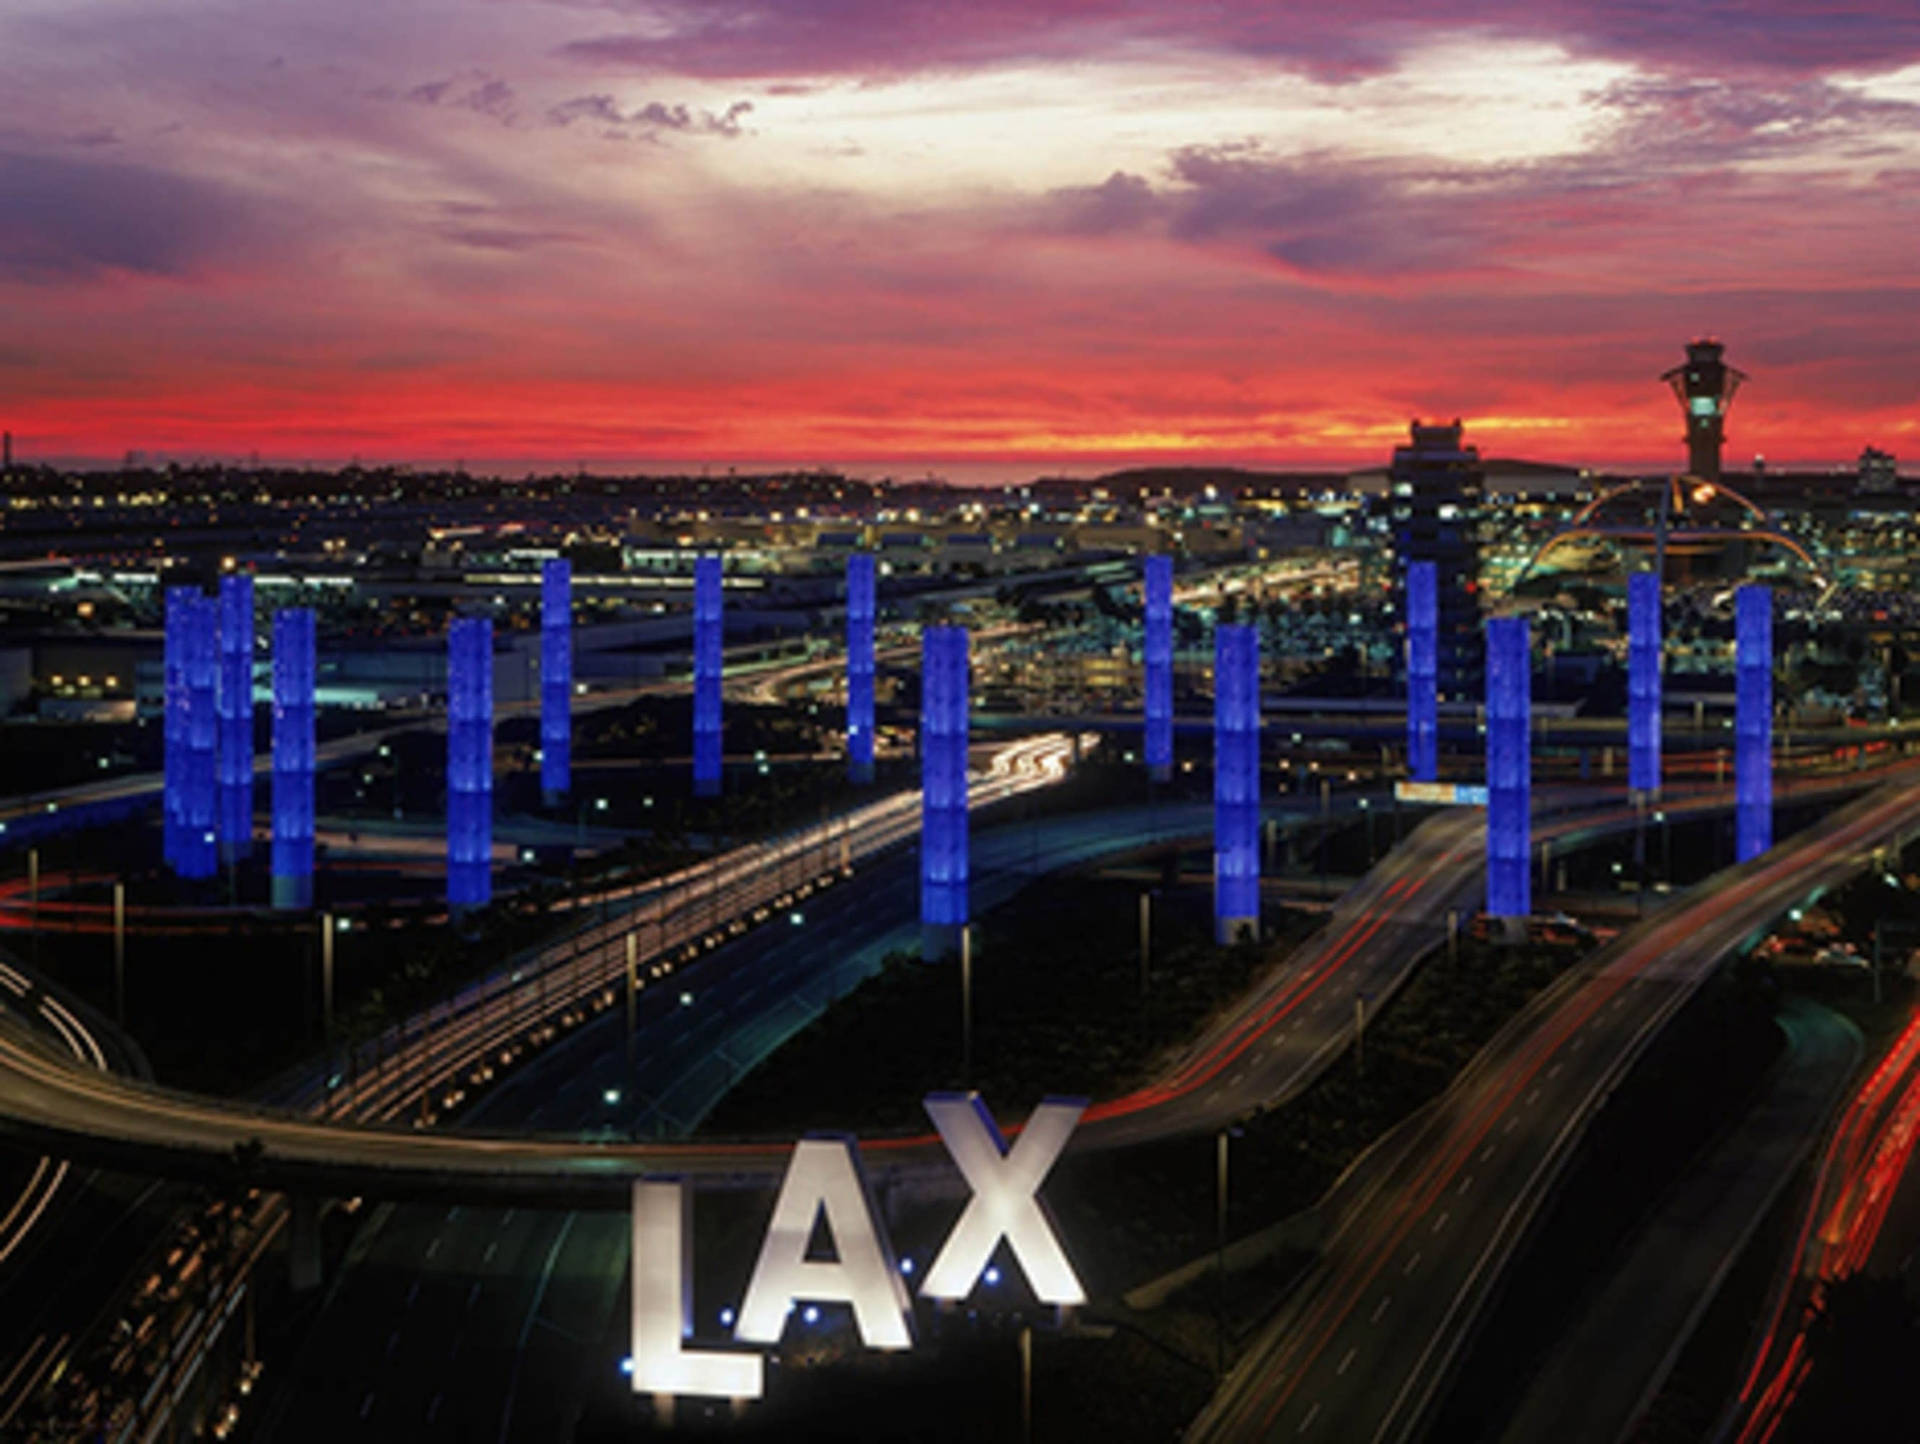 Lax Terminal With Sunset Sky Wallpaper